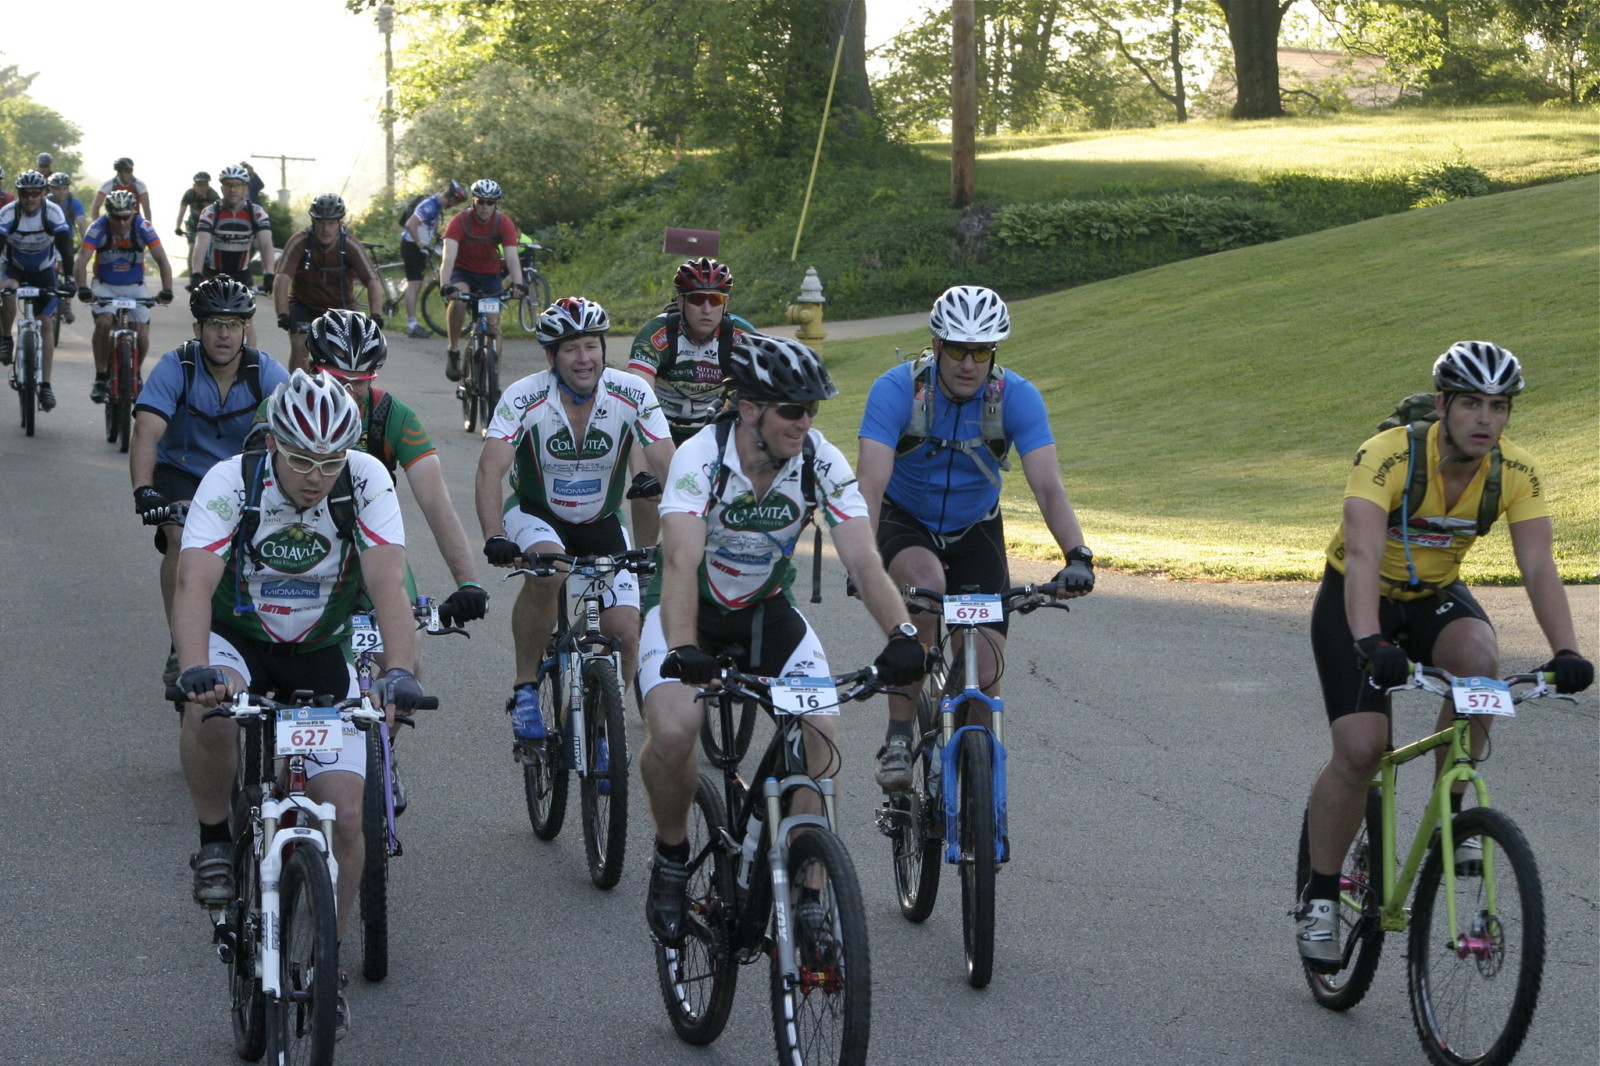 The Mohican 100 will continue on this Saturday despite the pandemic. photo: Jeremy Pelaston on flickr